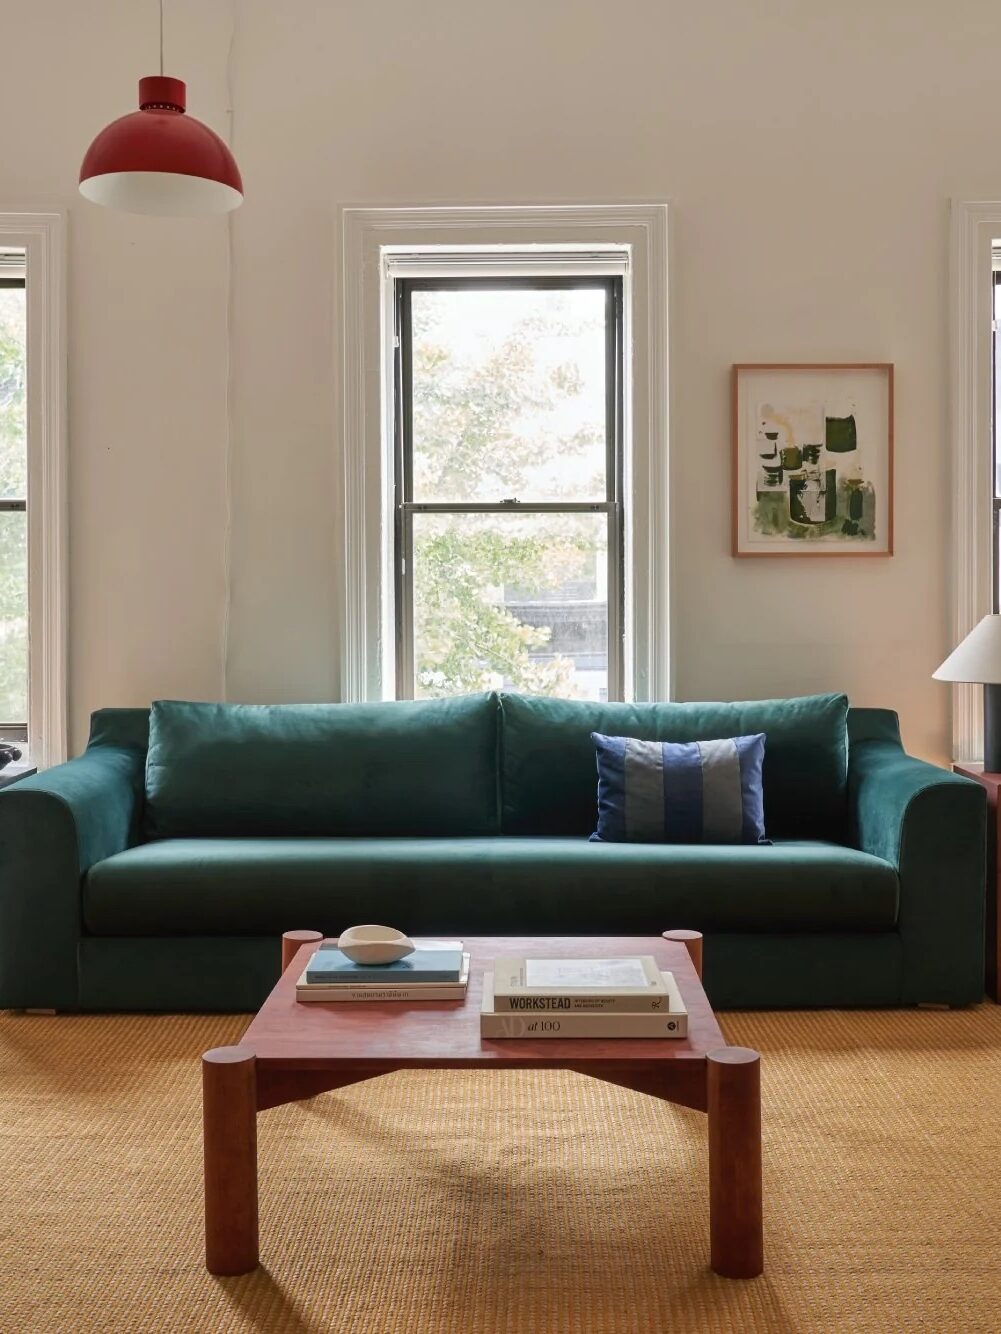 A living room with a green sofa, a wooden coffee table, a white armchair, and three windows. The room features a red pendant light, a beige rug, and a framed plant artwork on the wall.